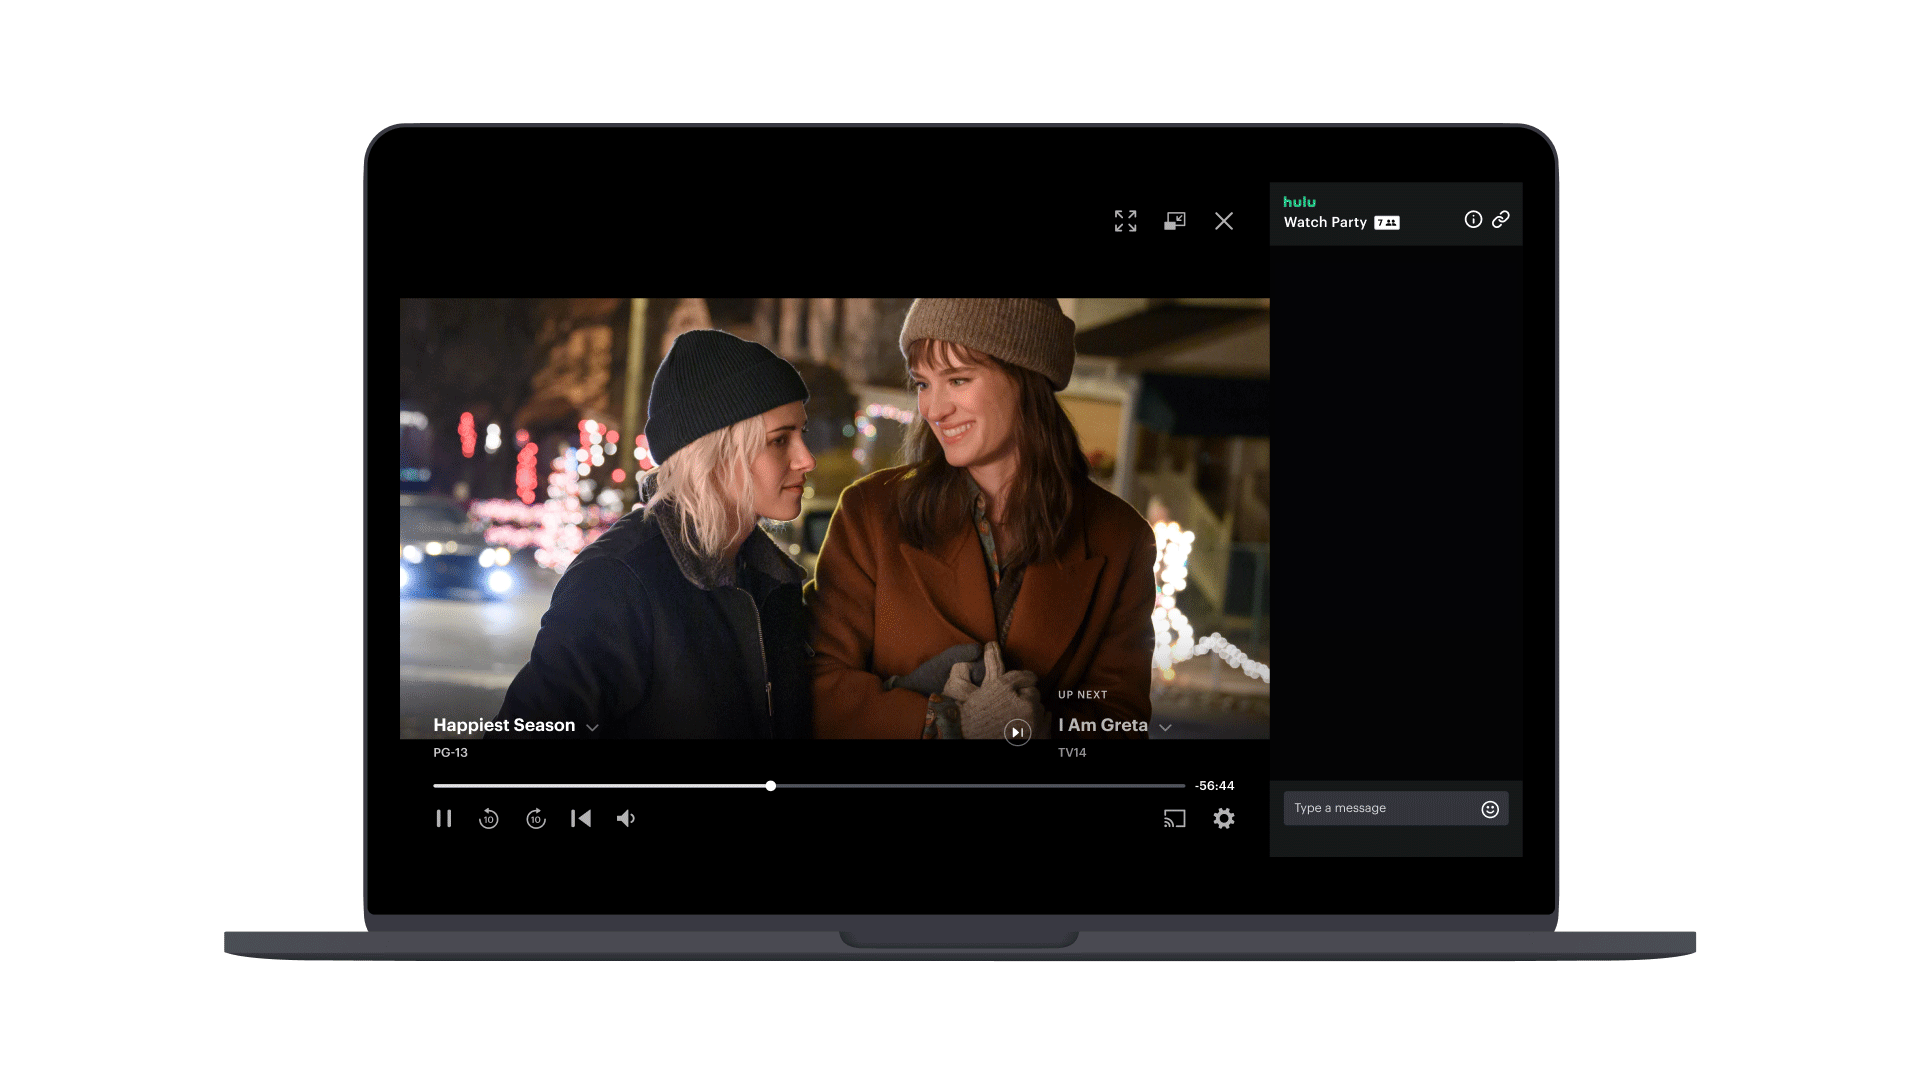 Hulu Celebrates Connection this Holiday Season with the Official Launch of Watch Party on Hulu for all On-Demand Subscribers